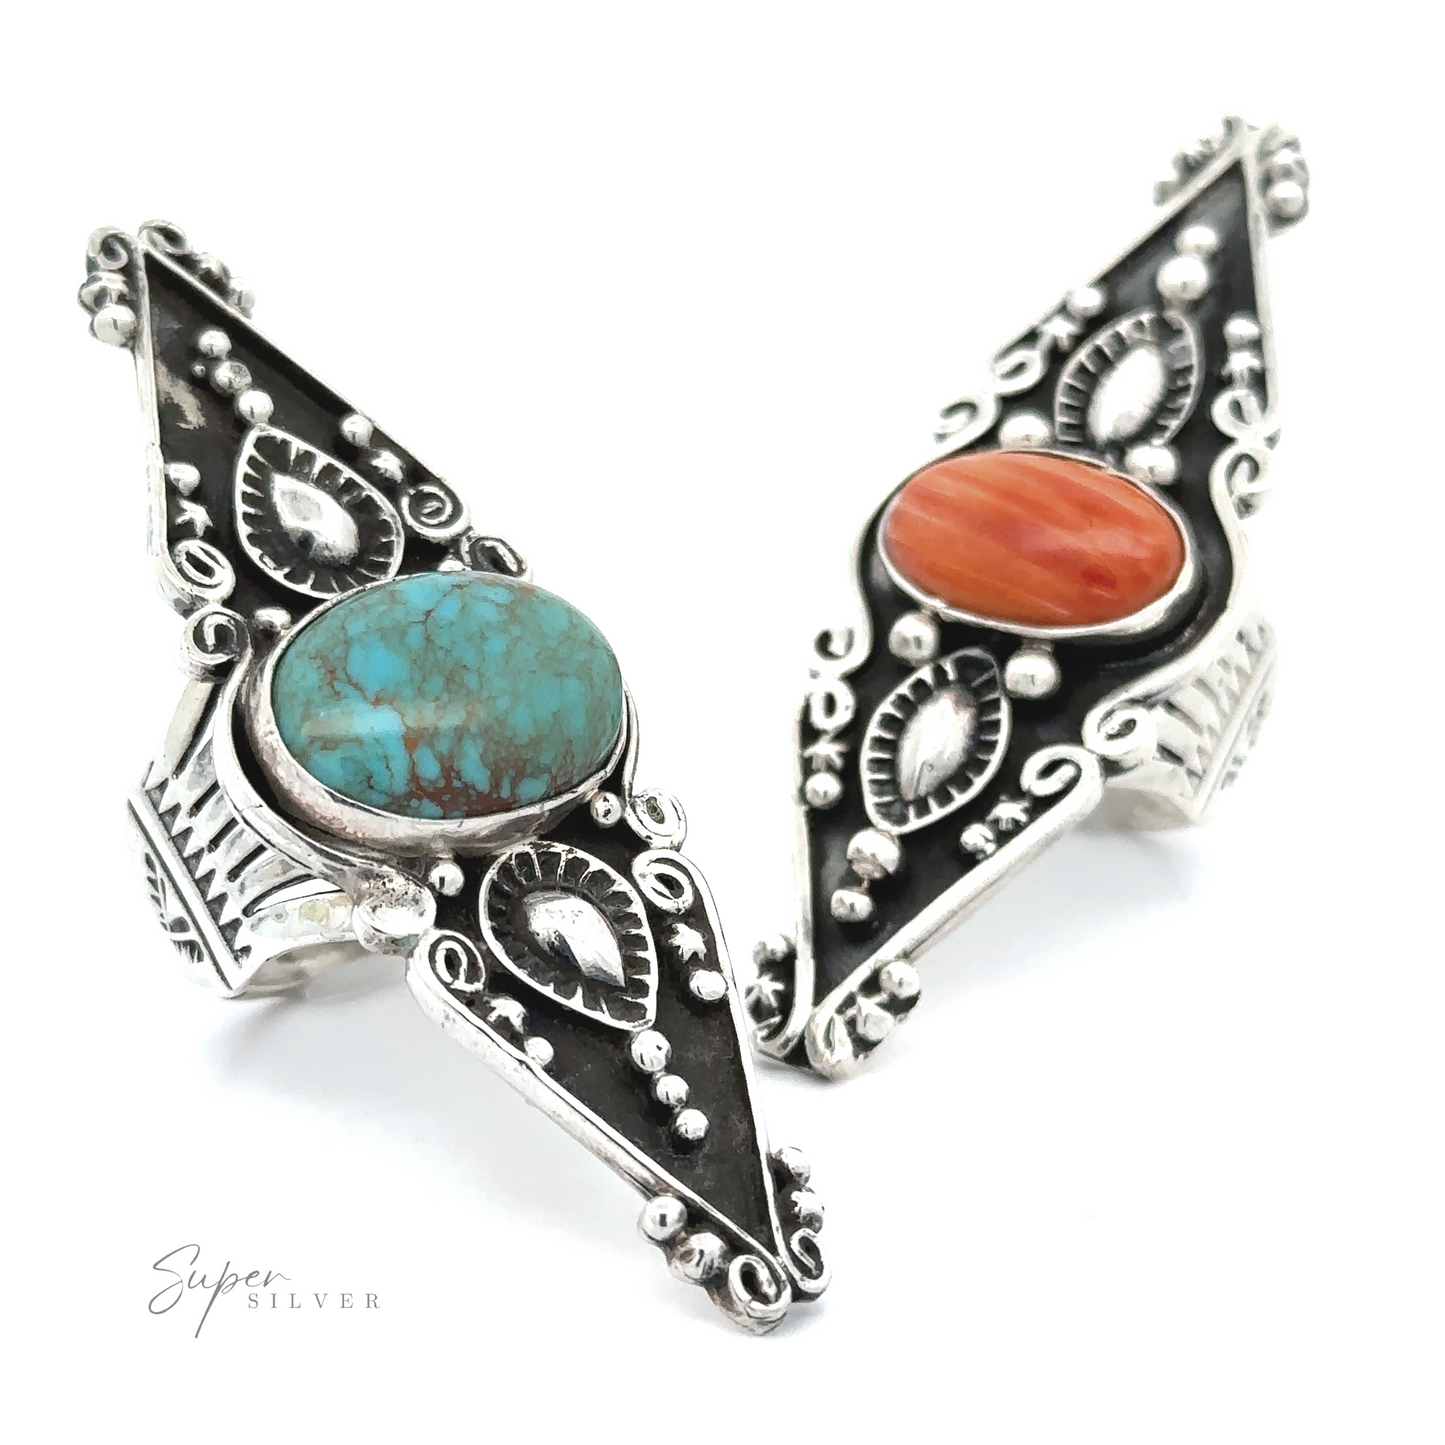 Two Stunning Native American Statement Rings, each featuring triangular designs in the style of Southwest artistry and inlaid with a prominent turquoise and orange stone respectively, against a white background.